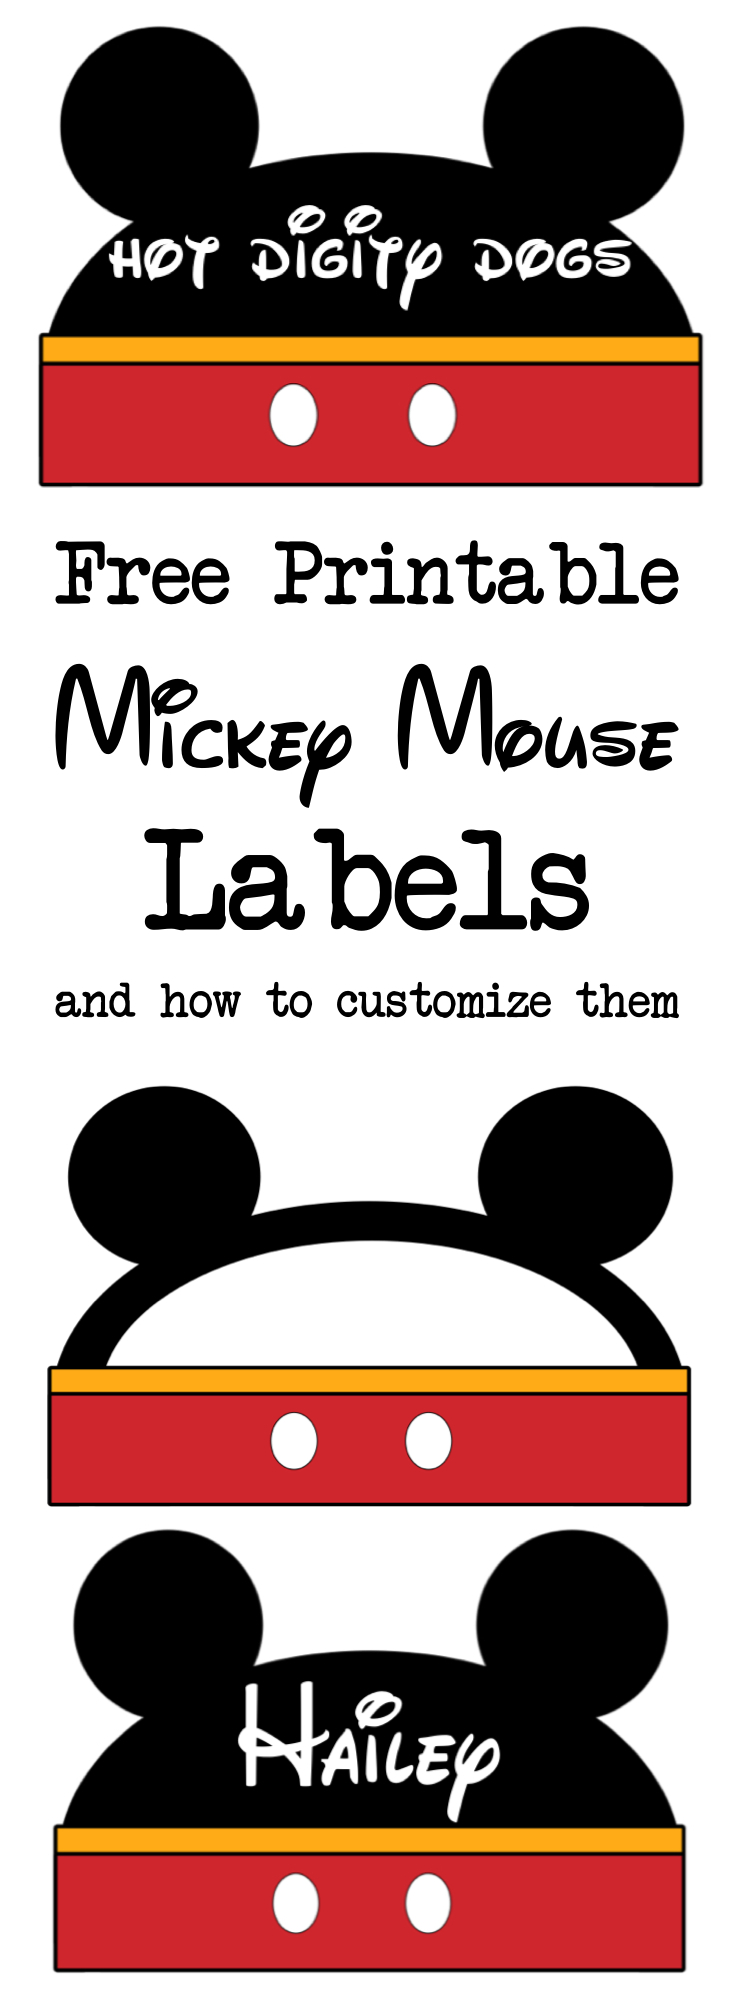 Mickey Mouse Labels free printable and instructions on how to customize them. Use these for food labels or name cards for a baby shower or birthday party.